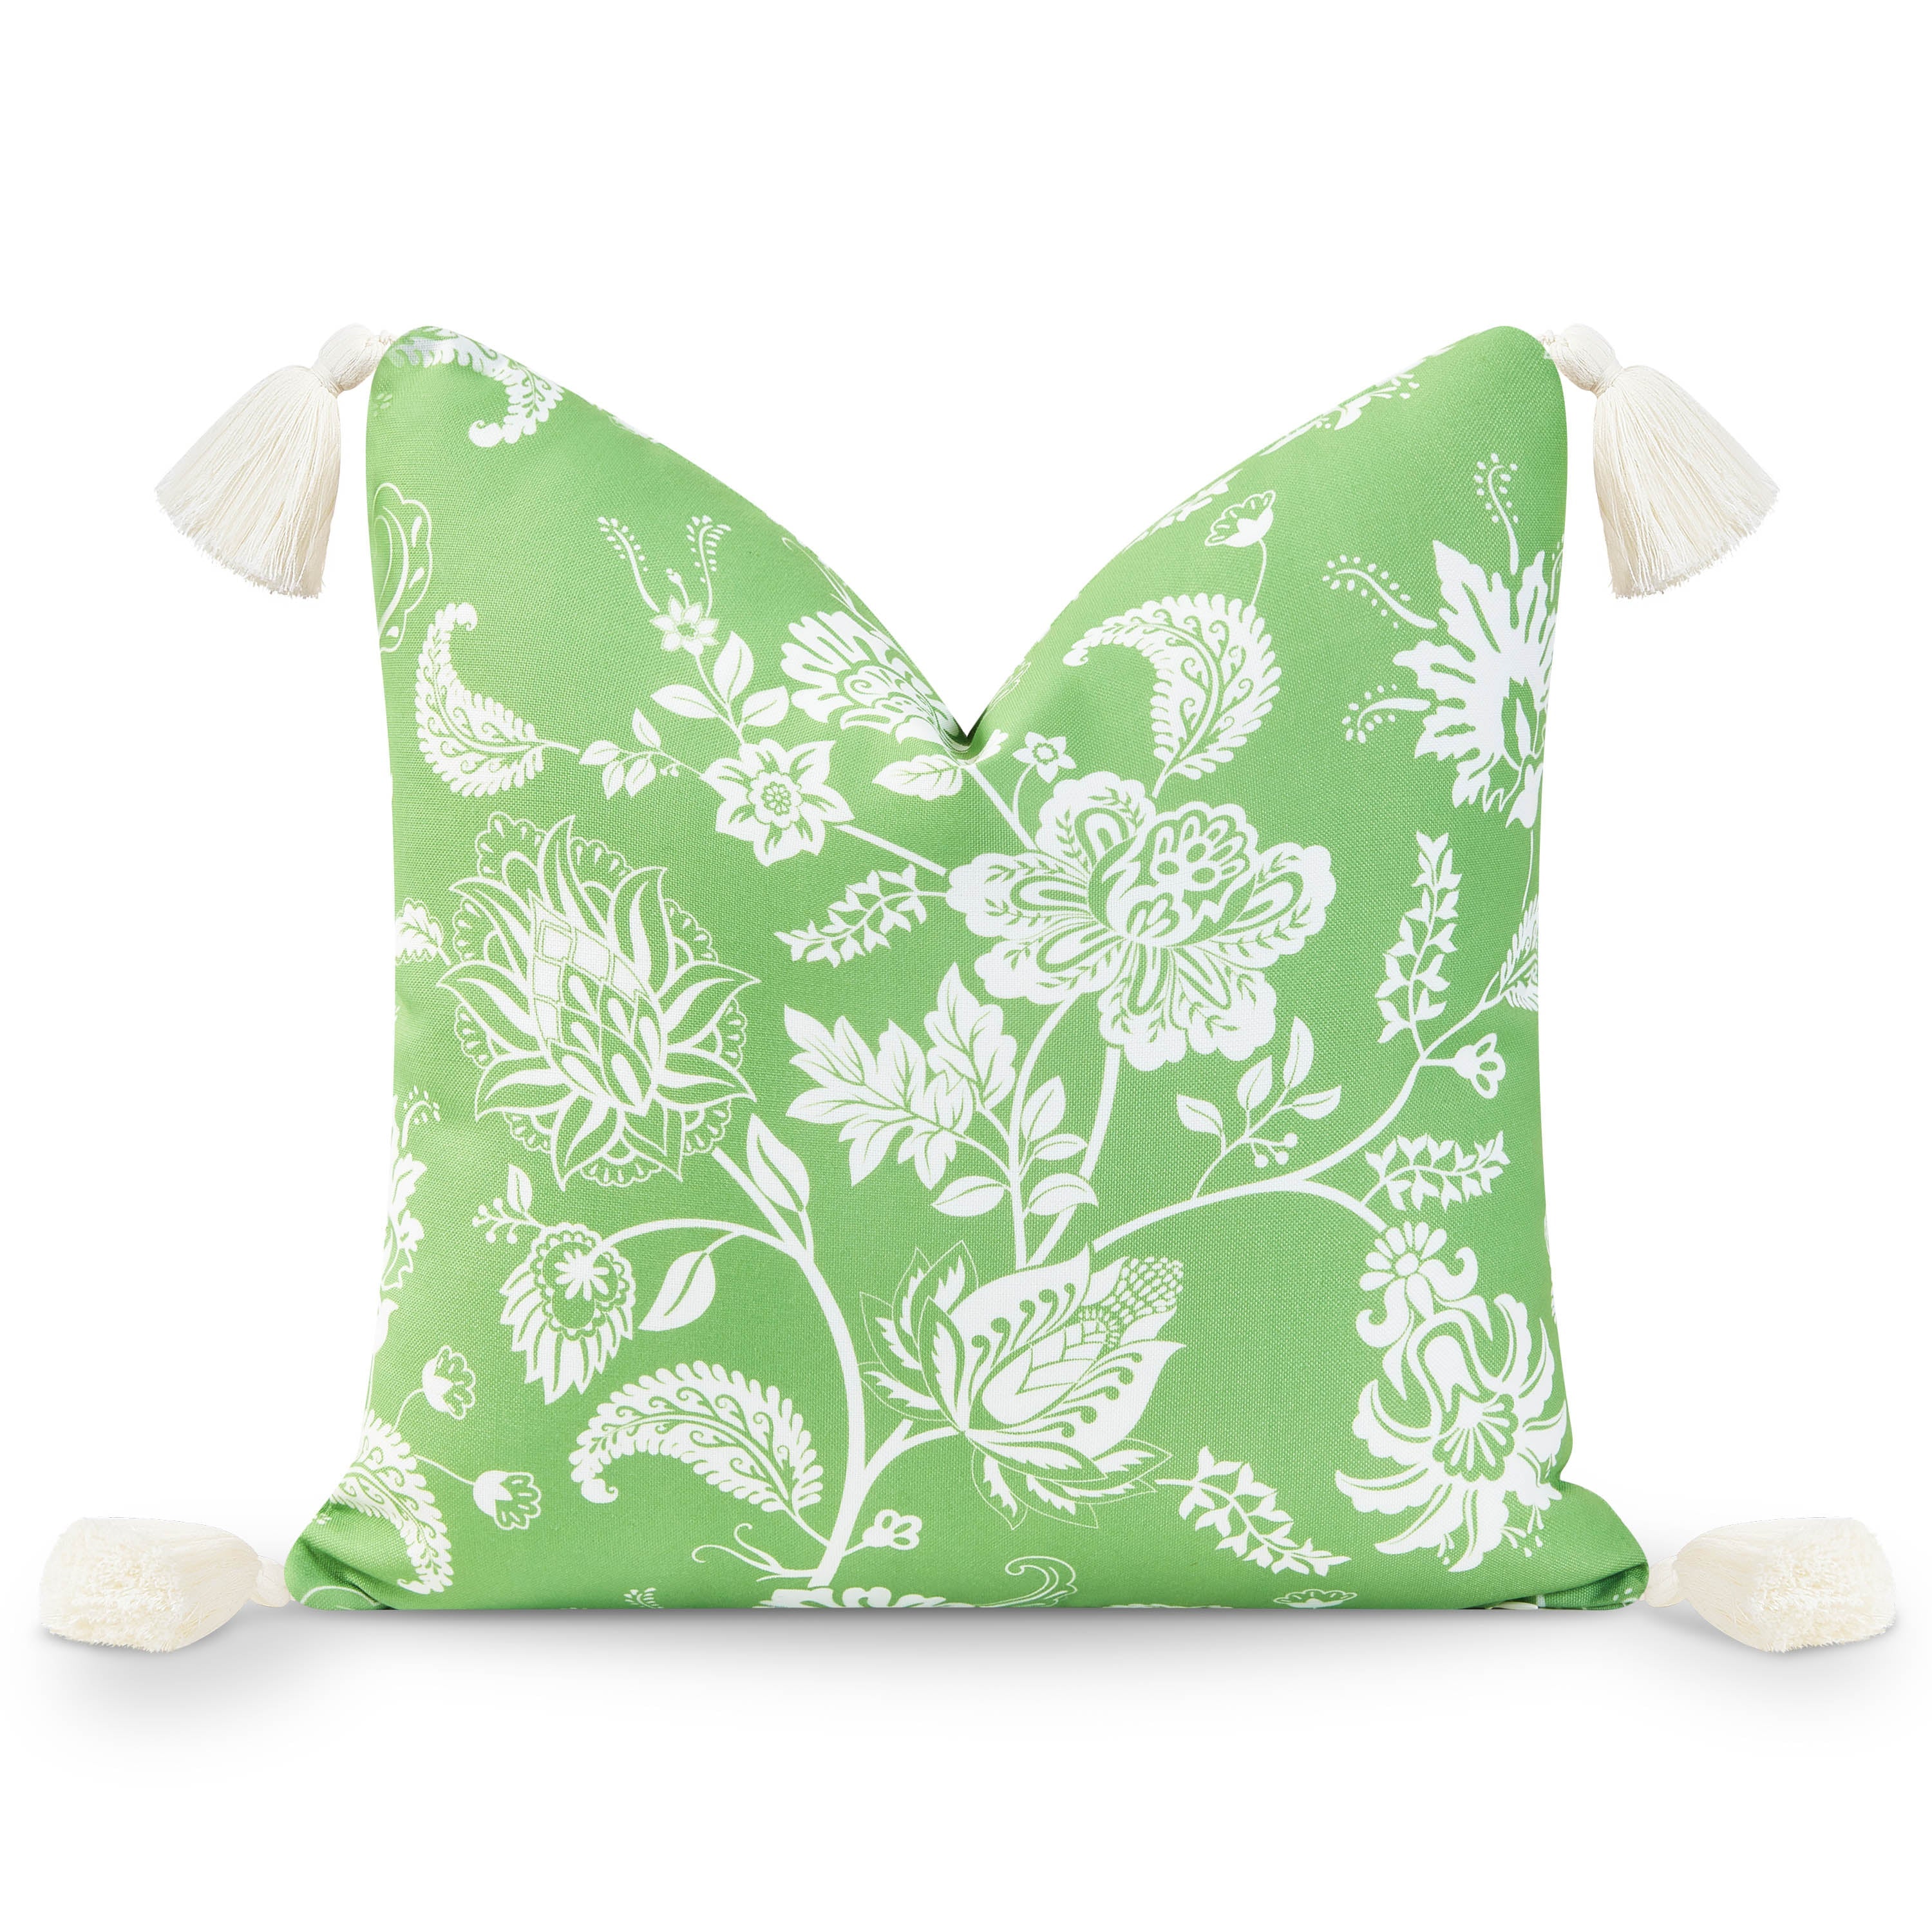 Coastal Indoor Outdoor Throw Pillow Cover, Floral Tassel, Pale Green, 18"x18"-0